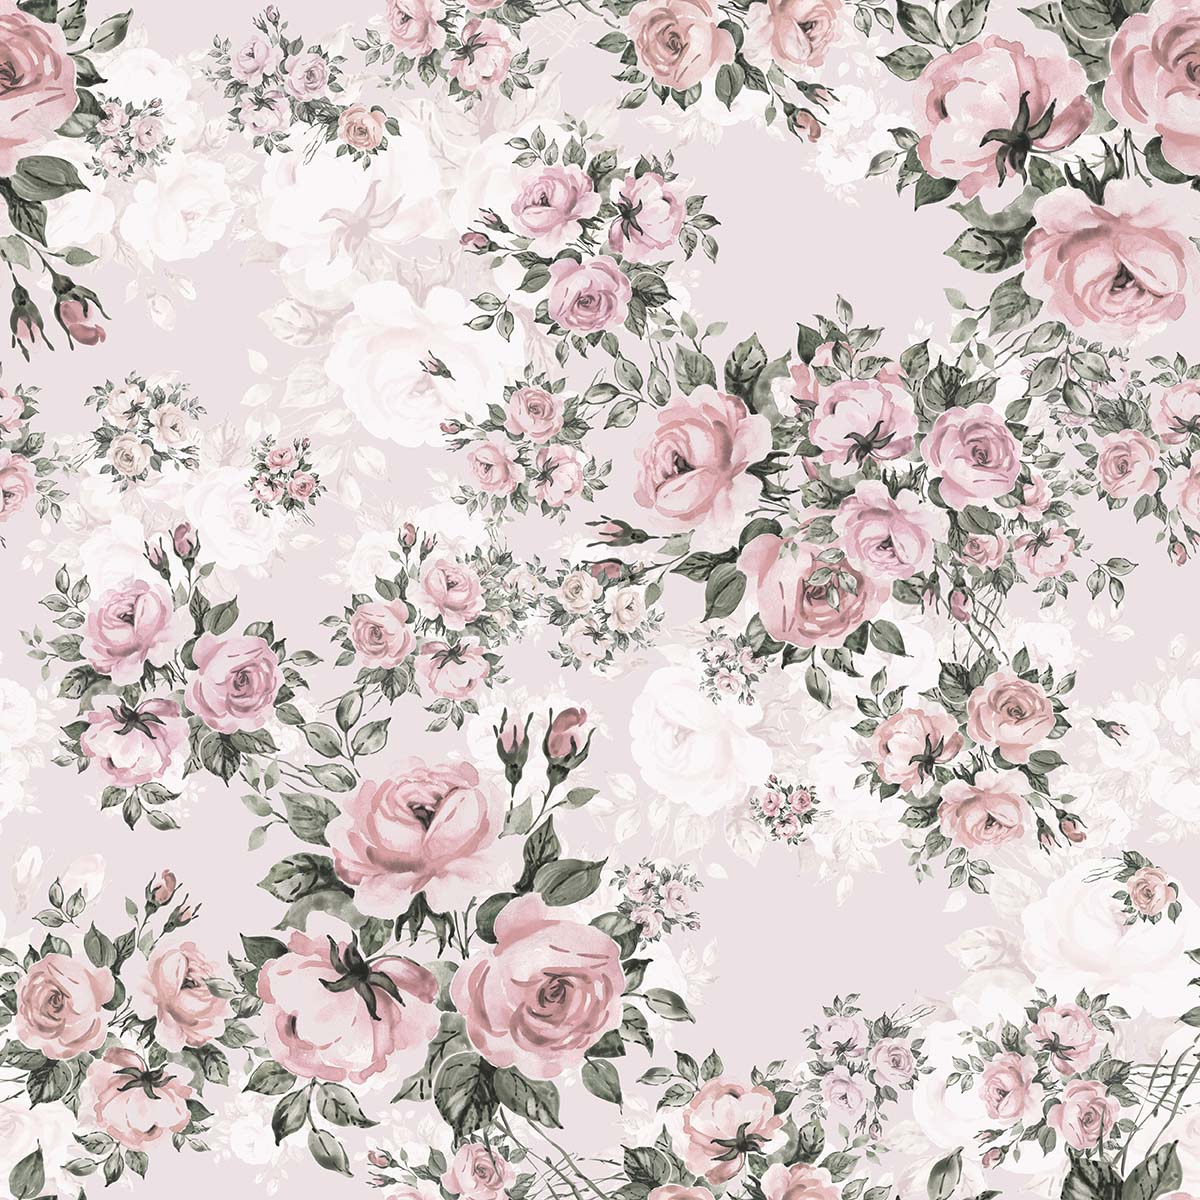 A pattern of pink and white flowers